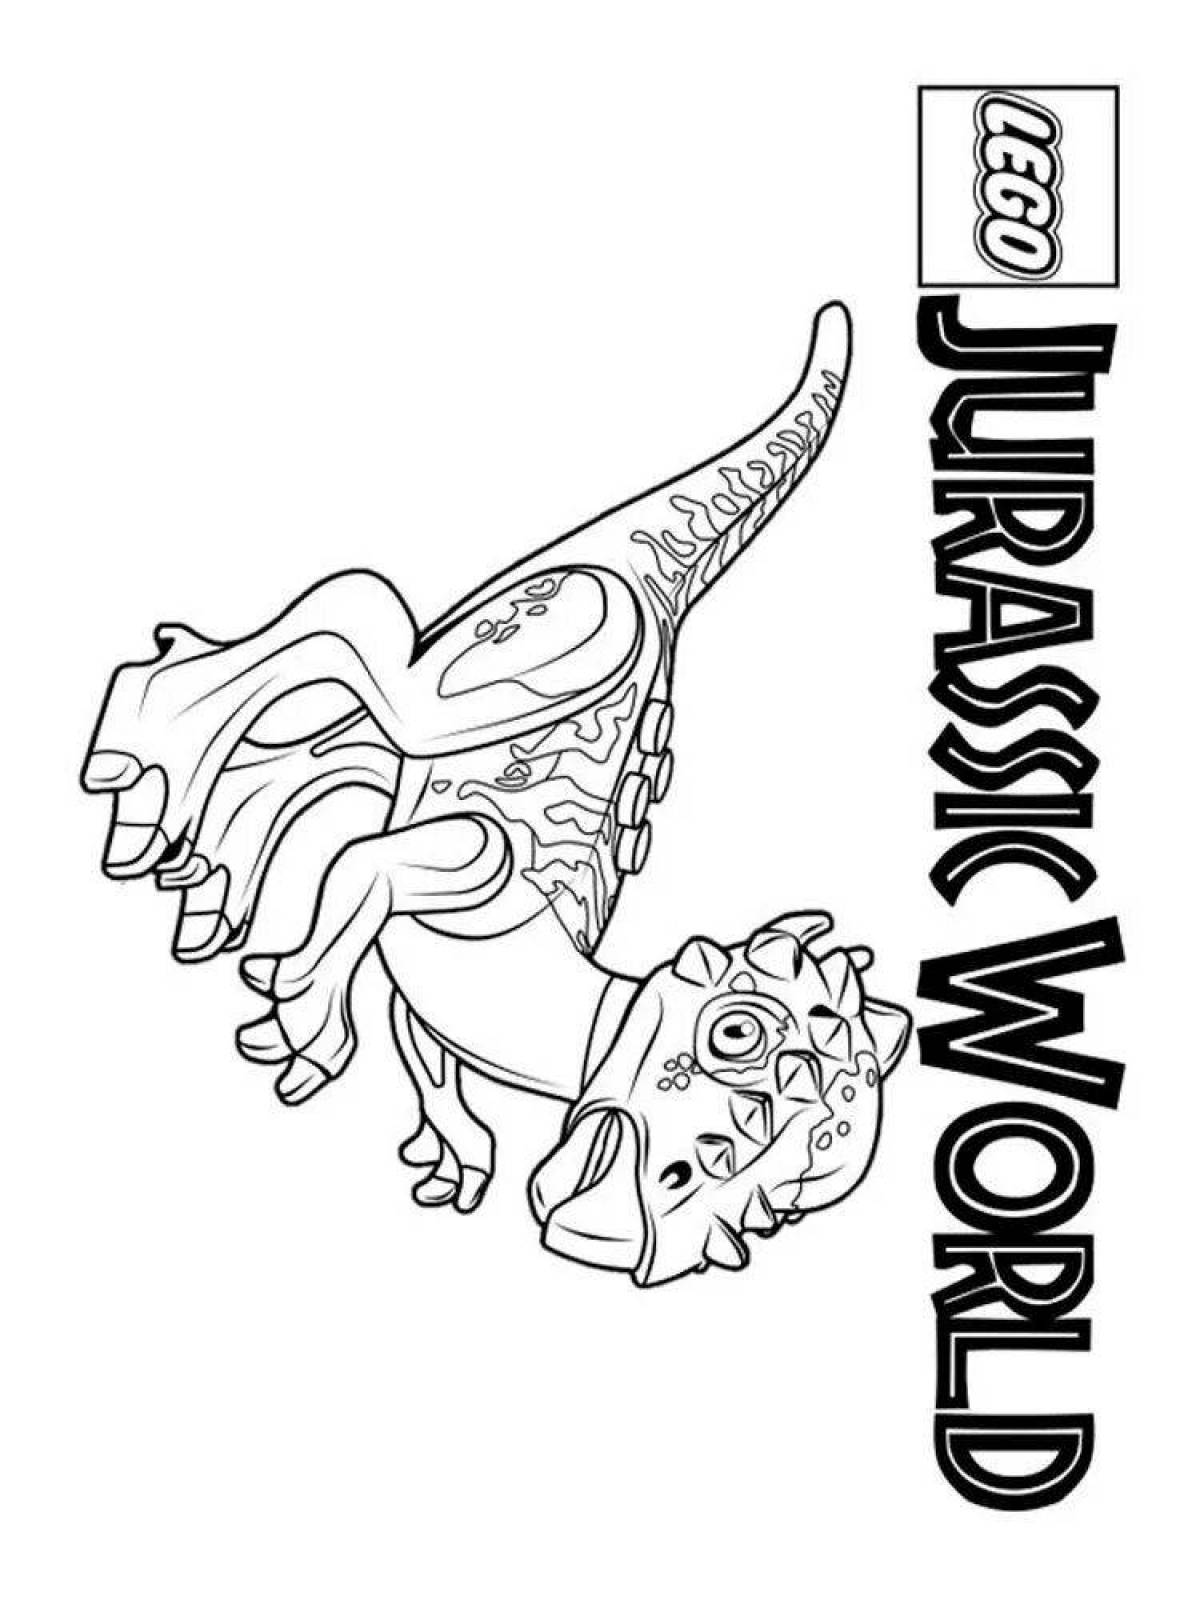 Colorful lego dinosaur coloring page